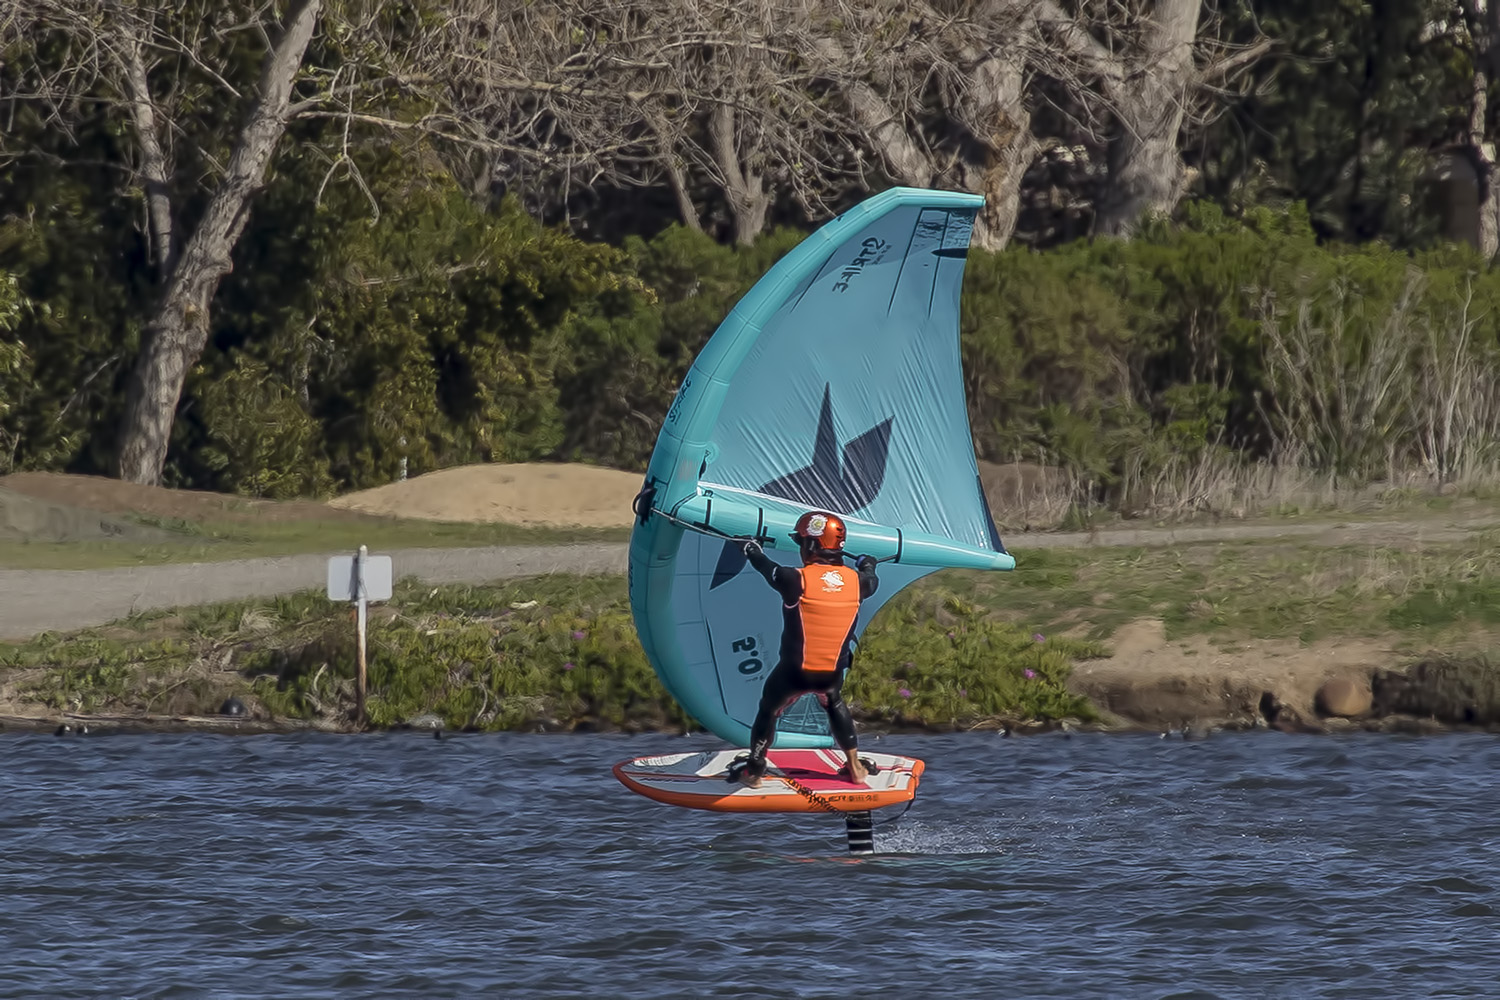 3/21/2021  Wing surfing with a handheld sail